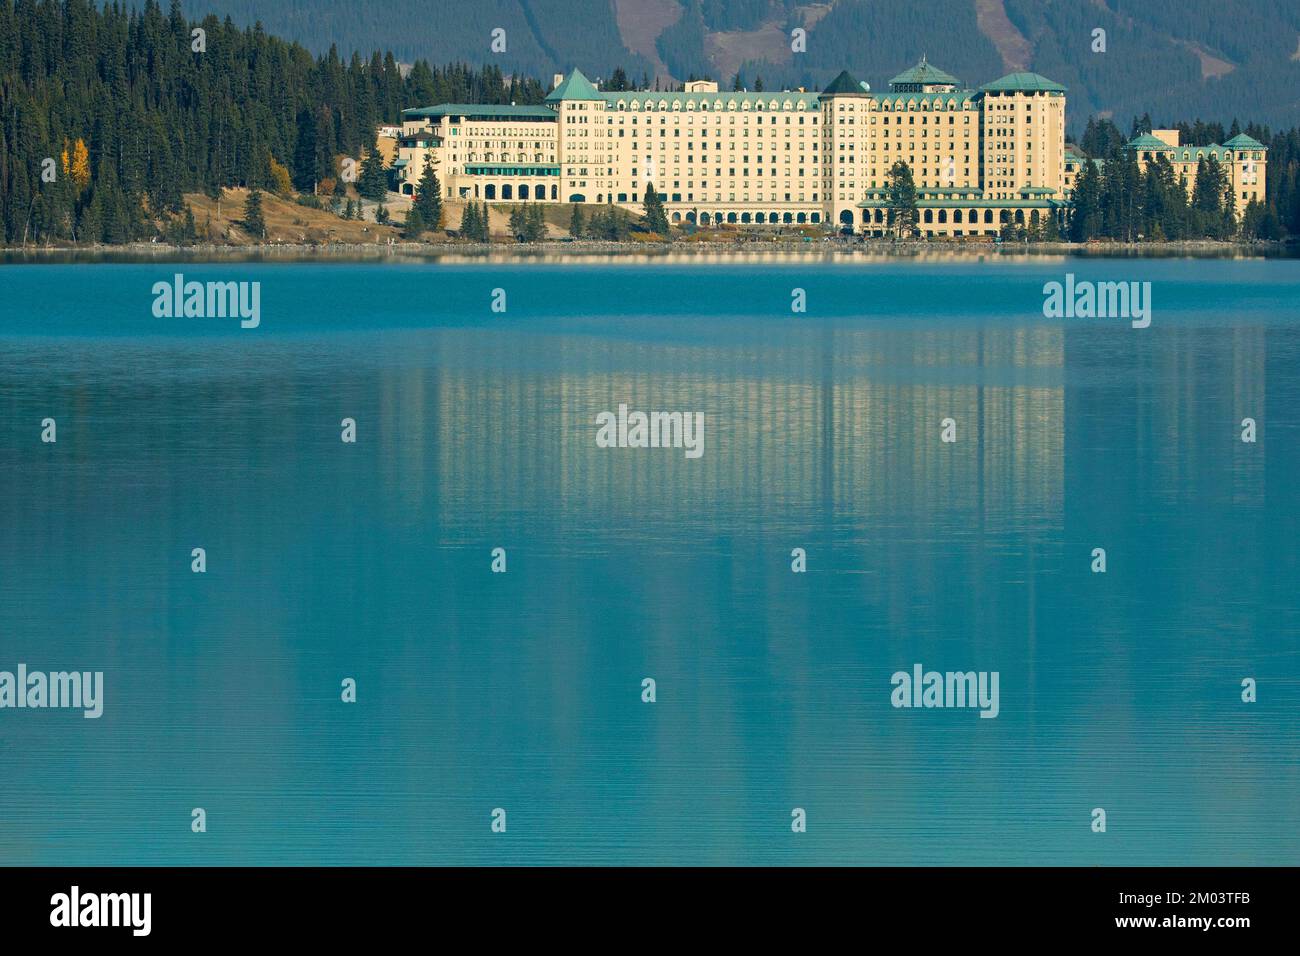 Fairmont Chateau Lake Louise hotel overlooking the turquoise waters of Lake Louise in Banff National Park, Canada Stock Photo